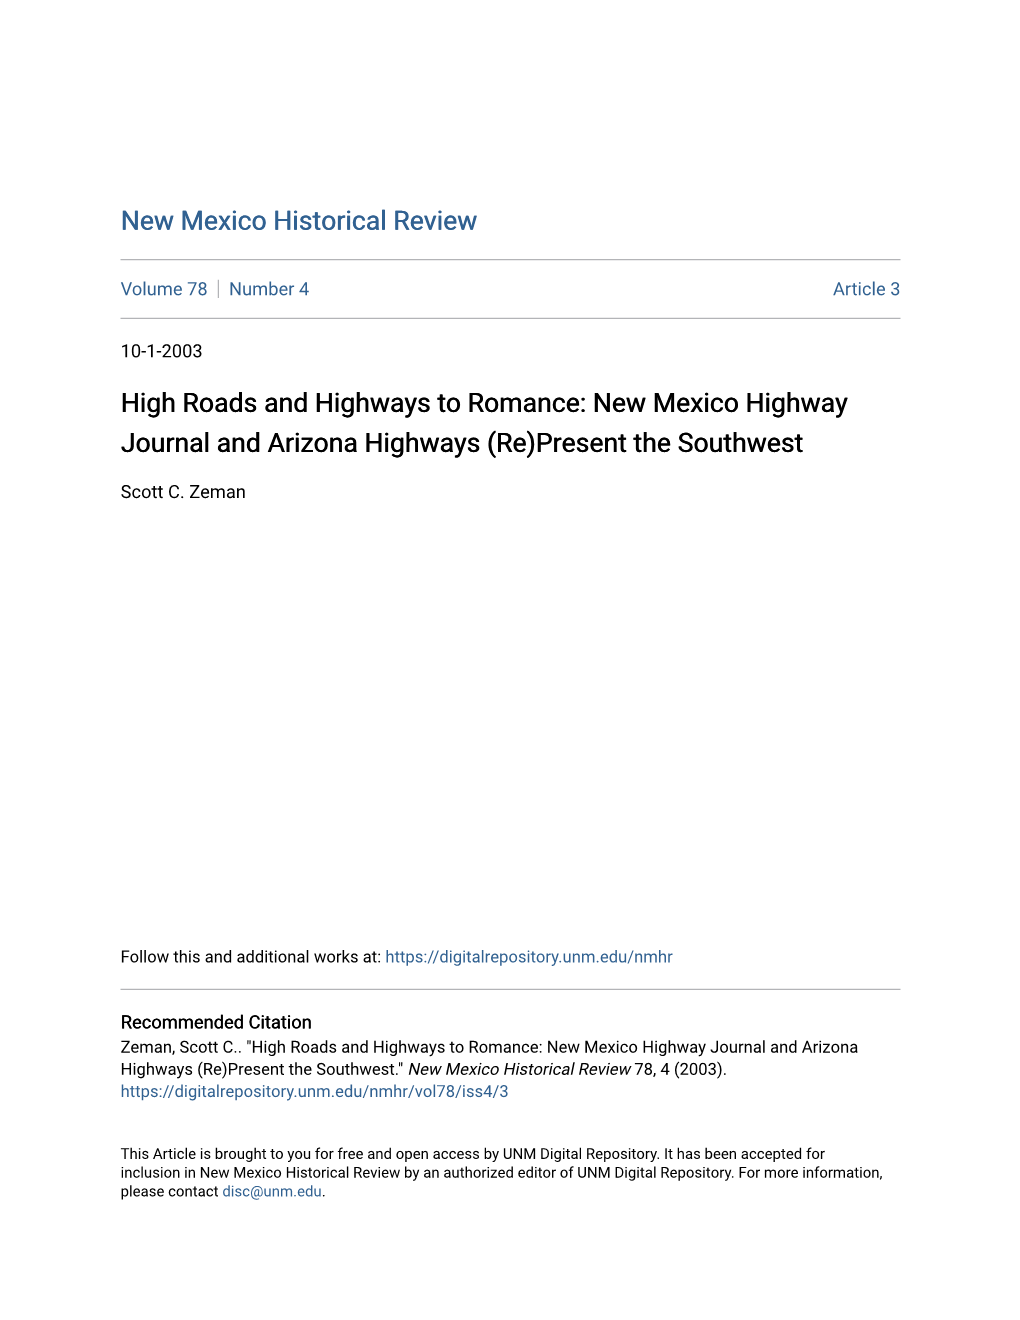 New Mexico Highway Journal and Arizona Highways (Re)Present the Southwest